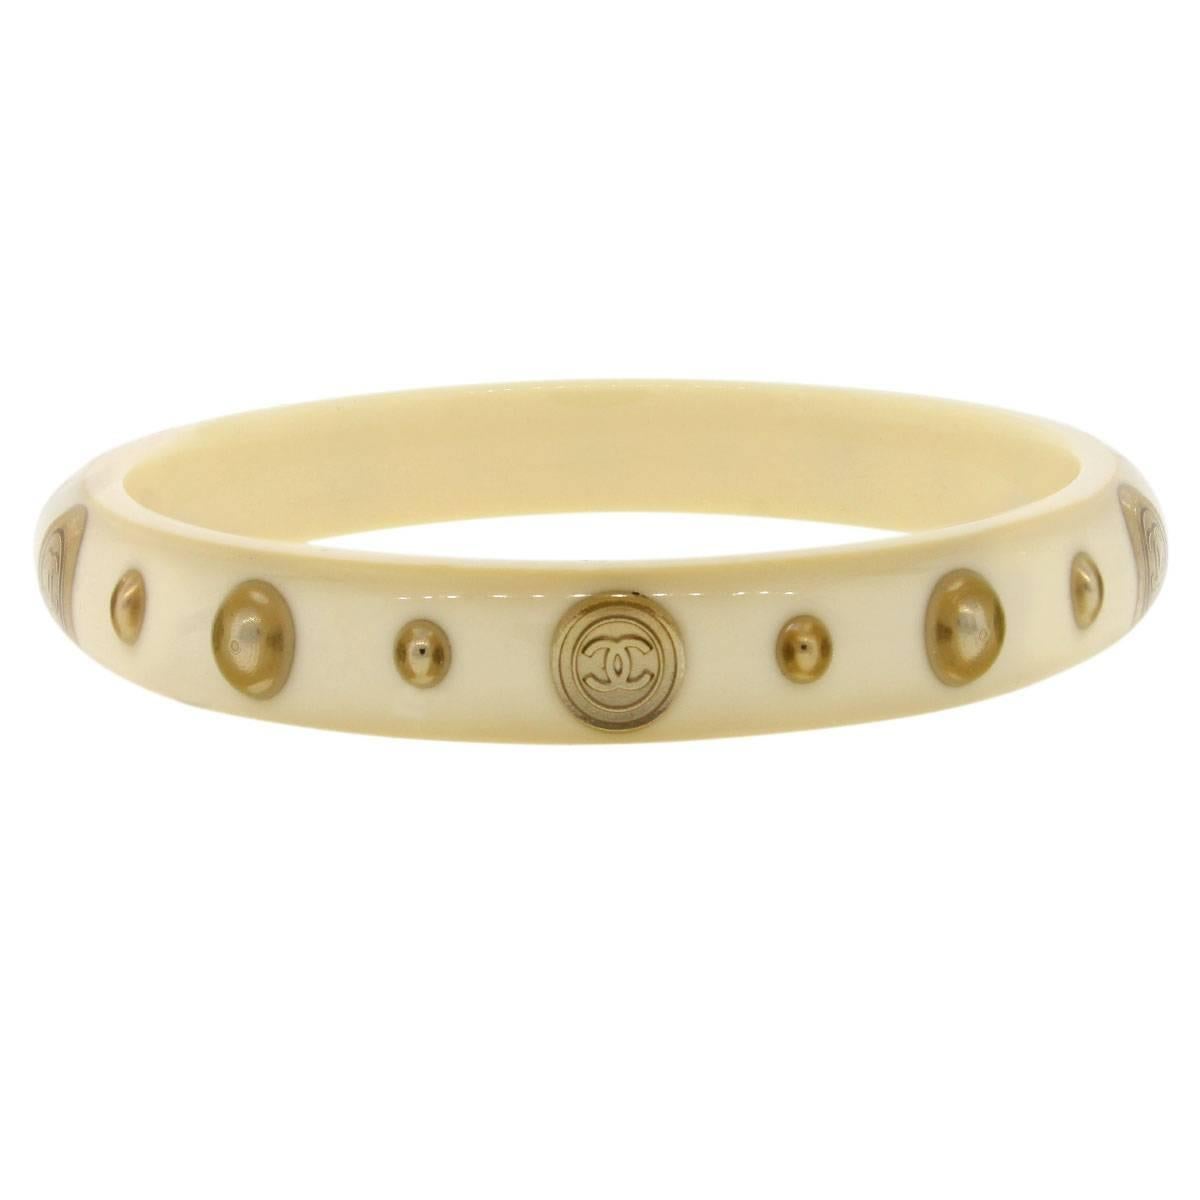 Brand:Chanel
Style: Bangle
Measurements: Will fit an 8